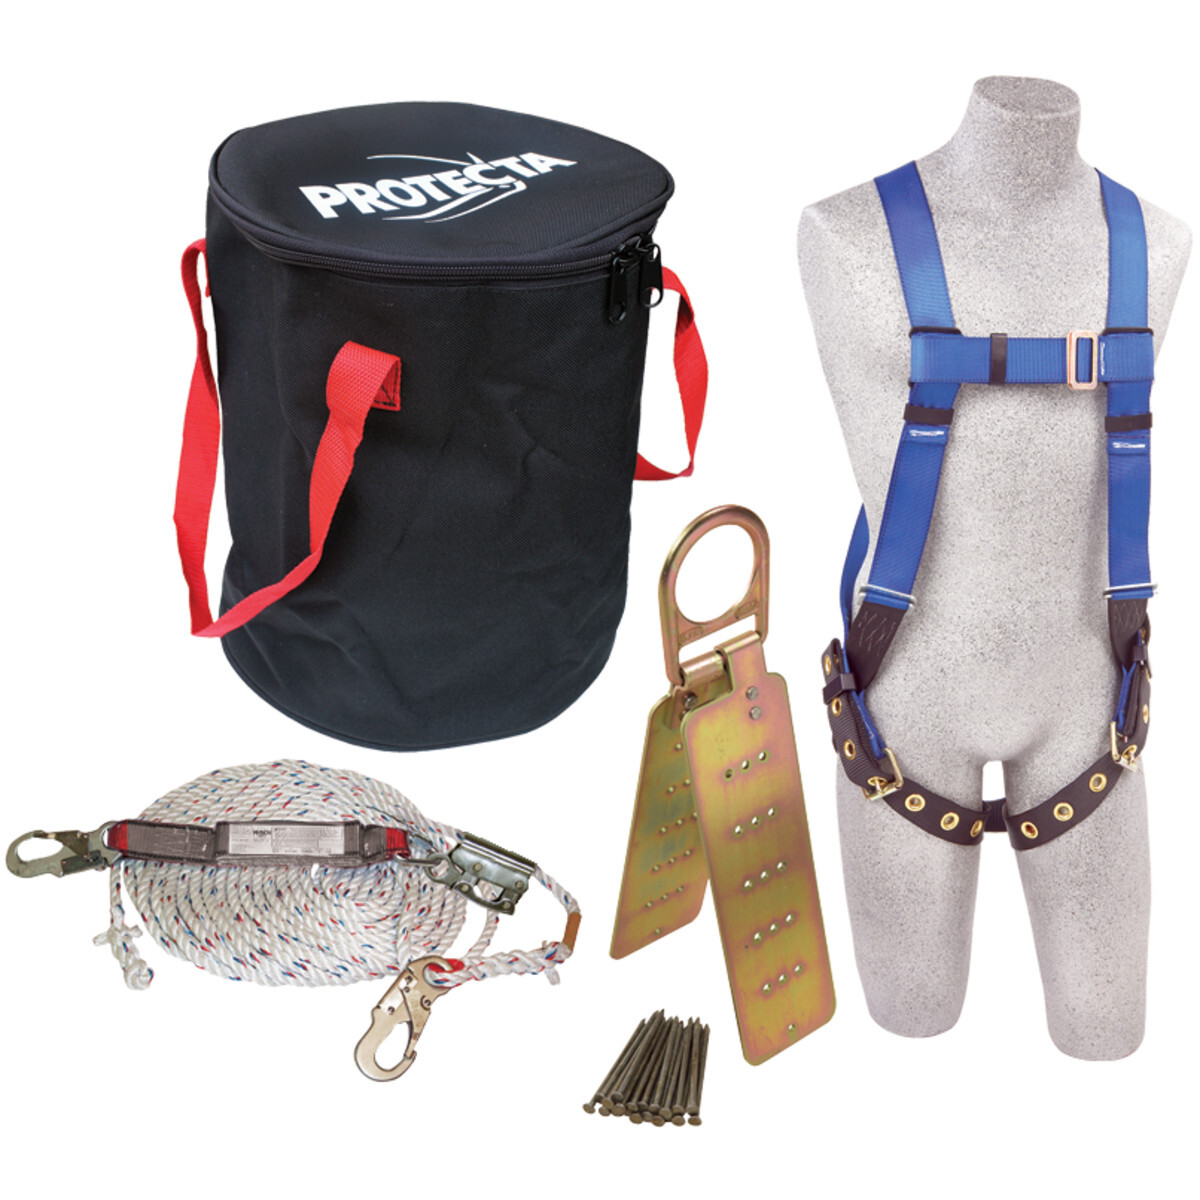 3M™ PROTECTA® Fall Protection Compliance Kit, In A Bag 2199814 (Includes Roof Anchor, Harness, Rope Adjuster With Lanyard, Lifel